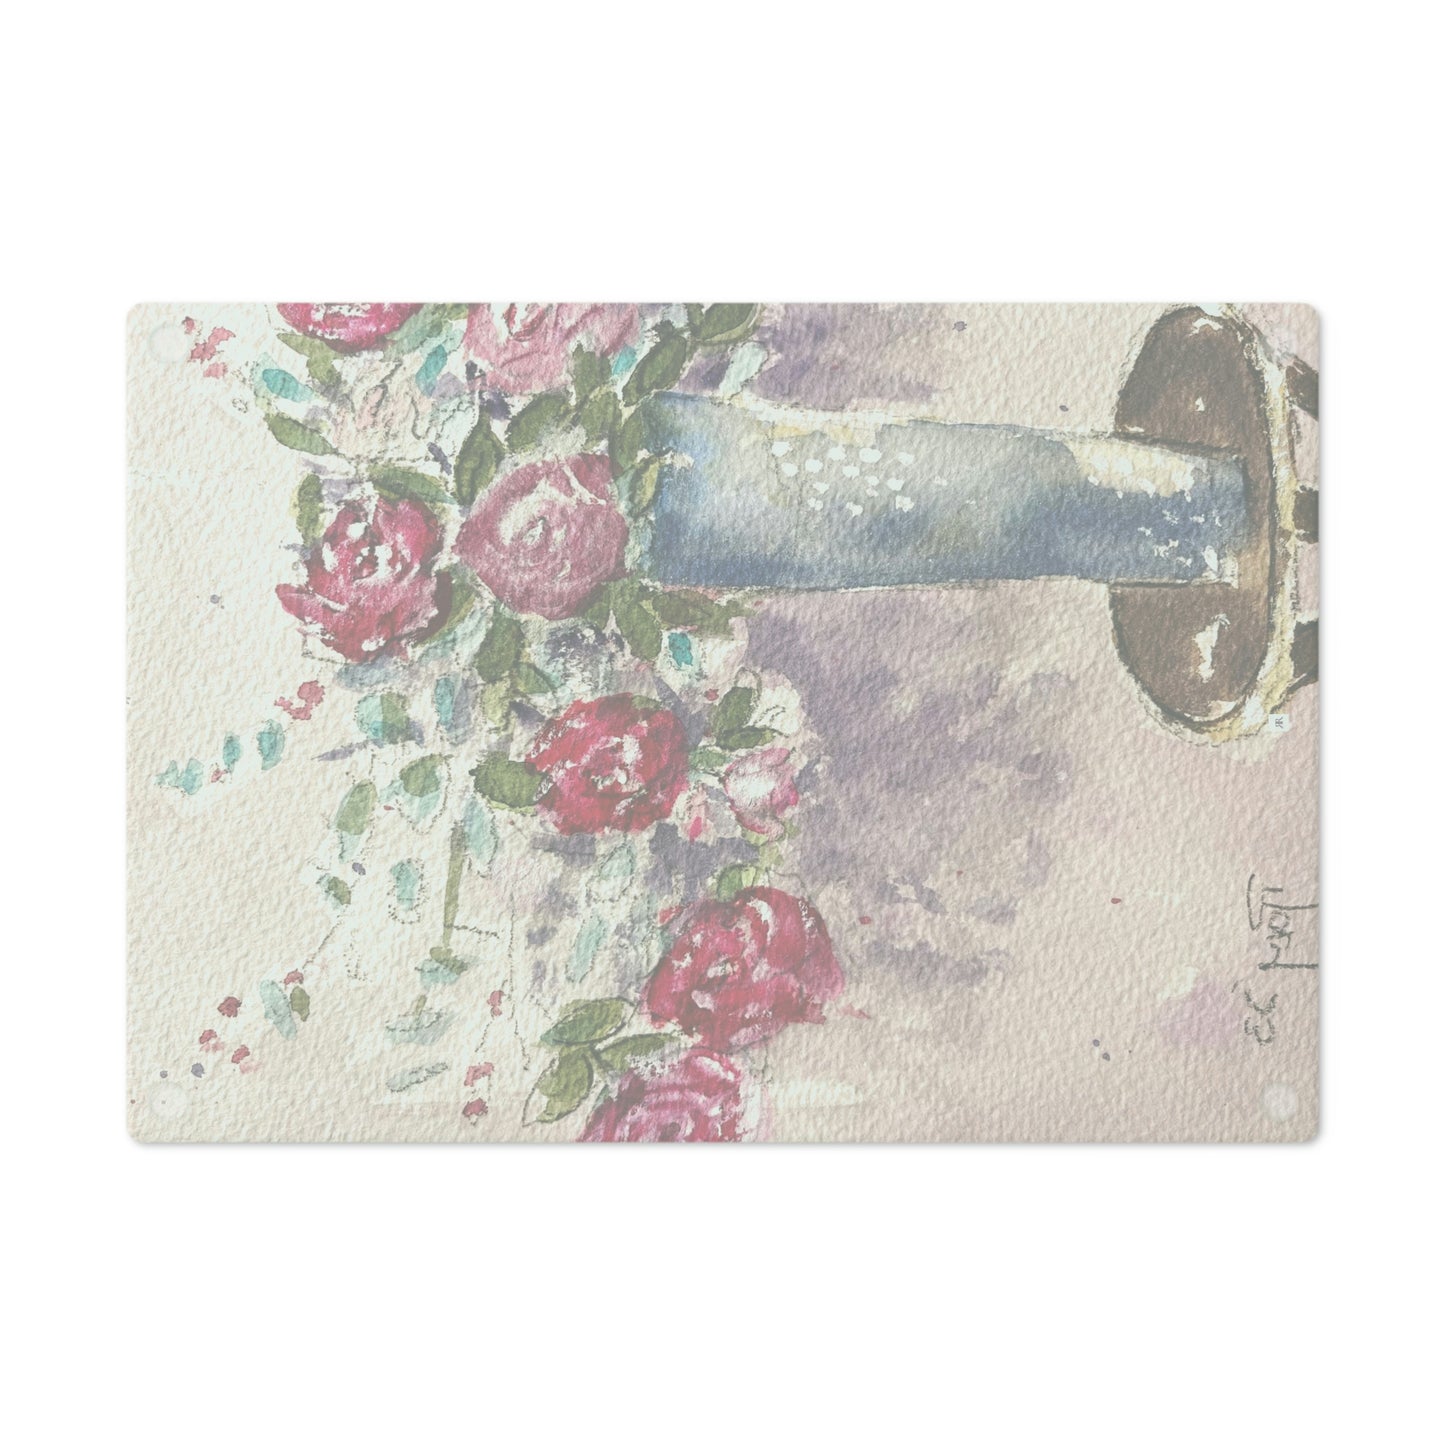 Roses in the Foyer Glass Cutting Board